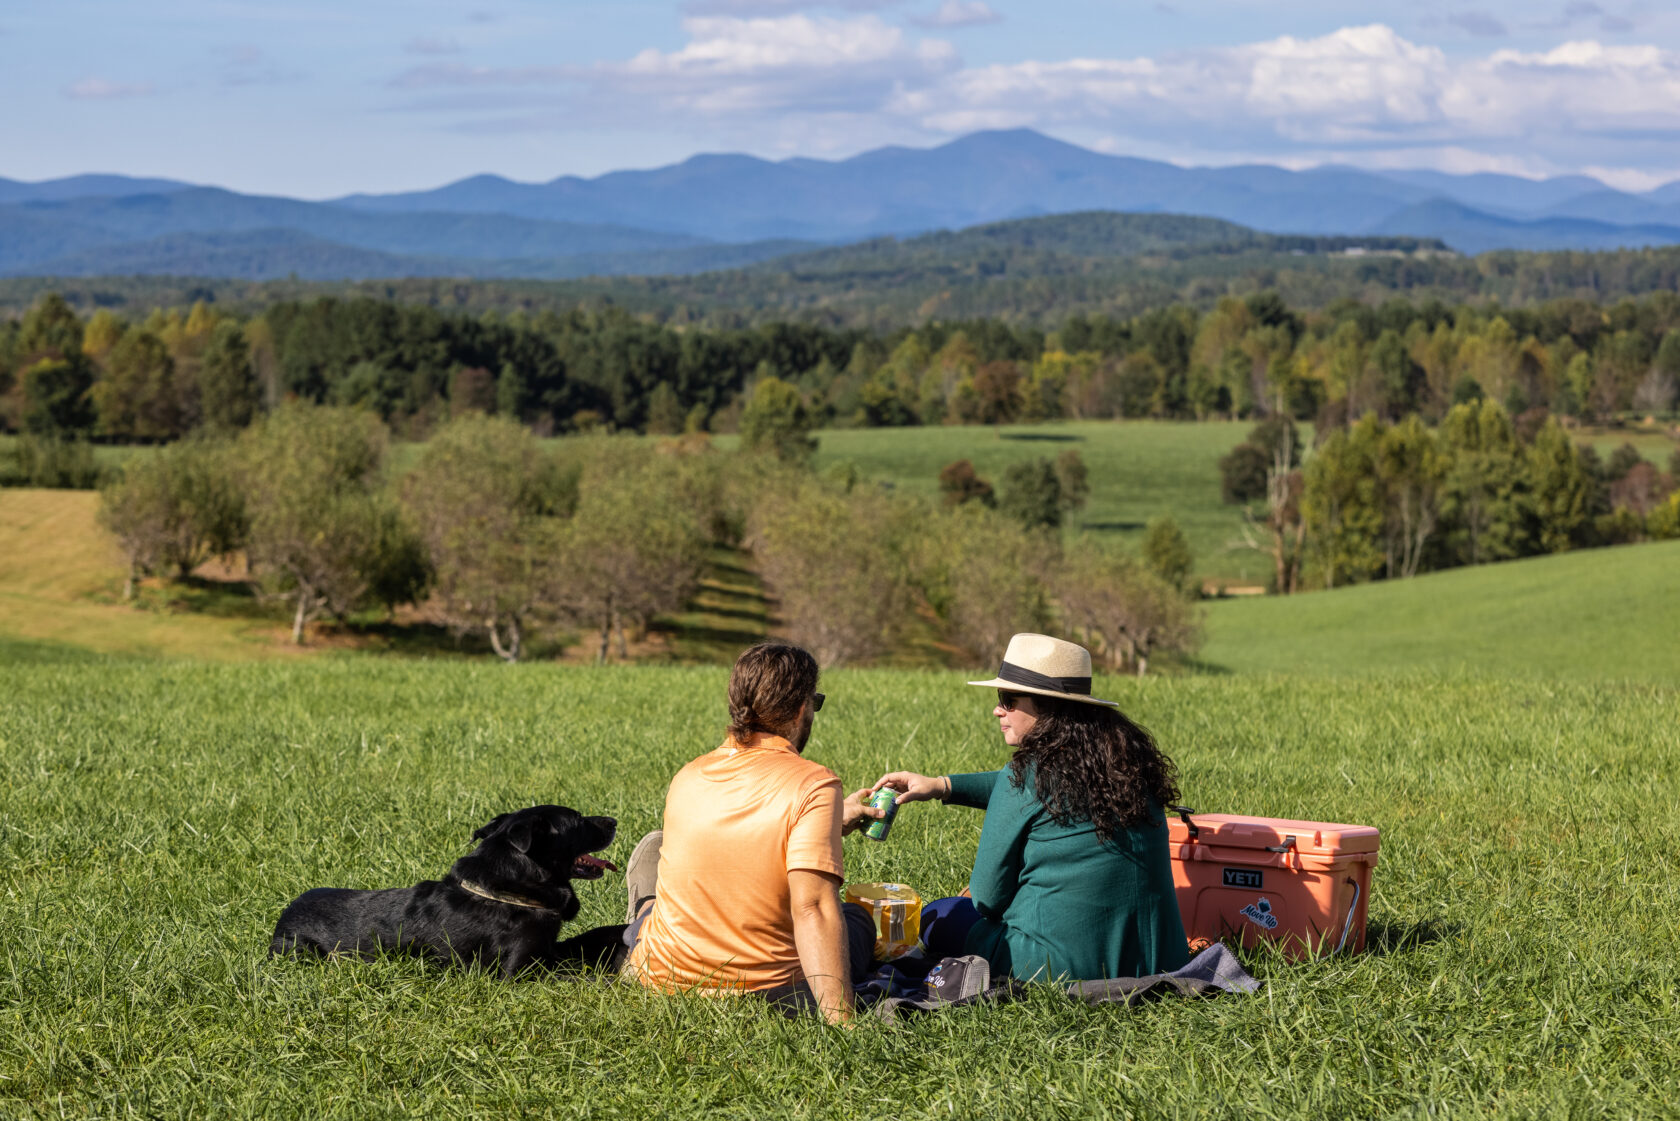 Picnic overlooking mountains at Chattooga Belle Farm